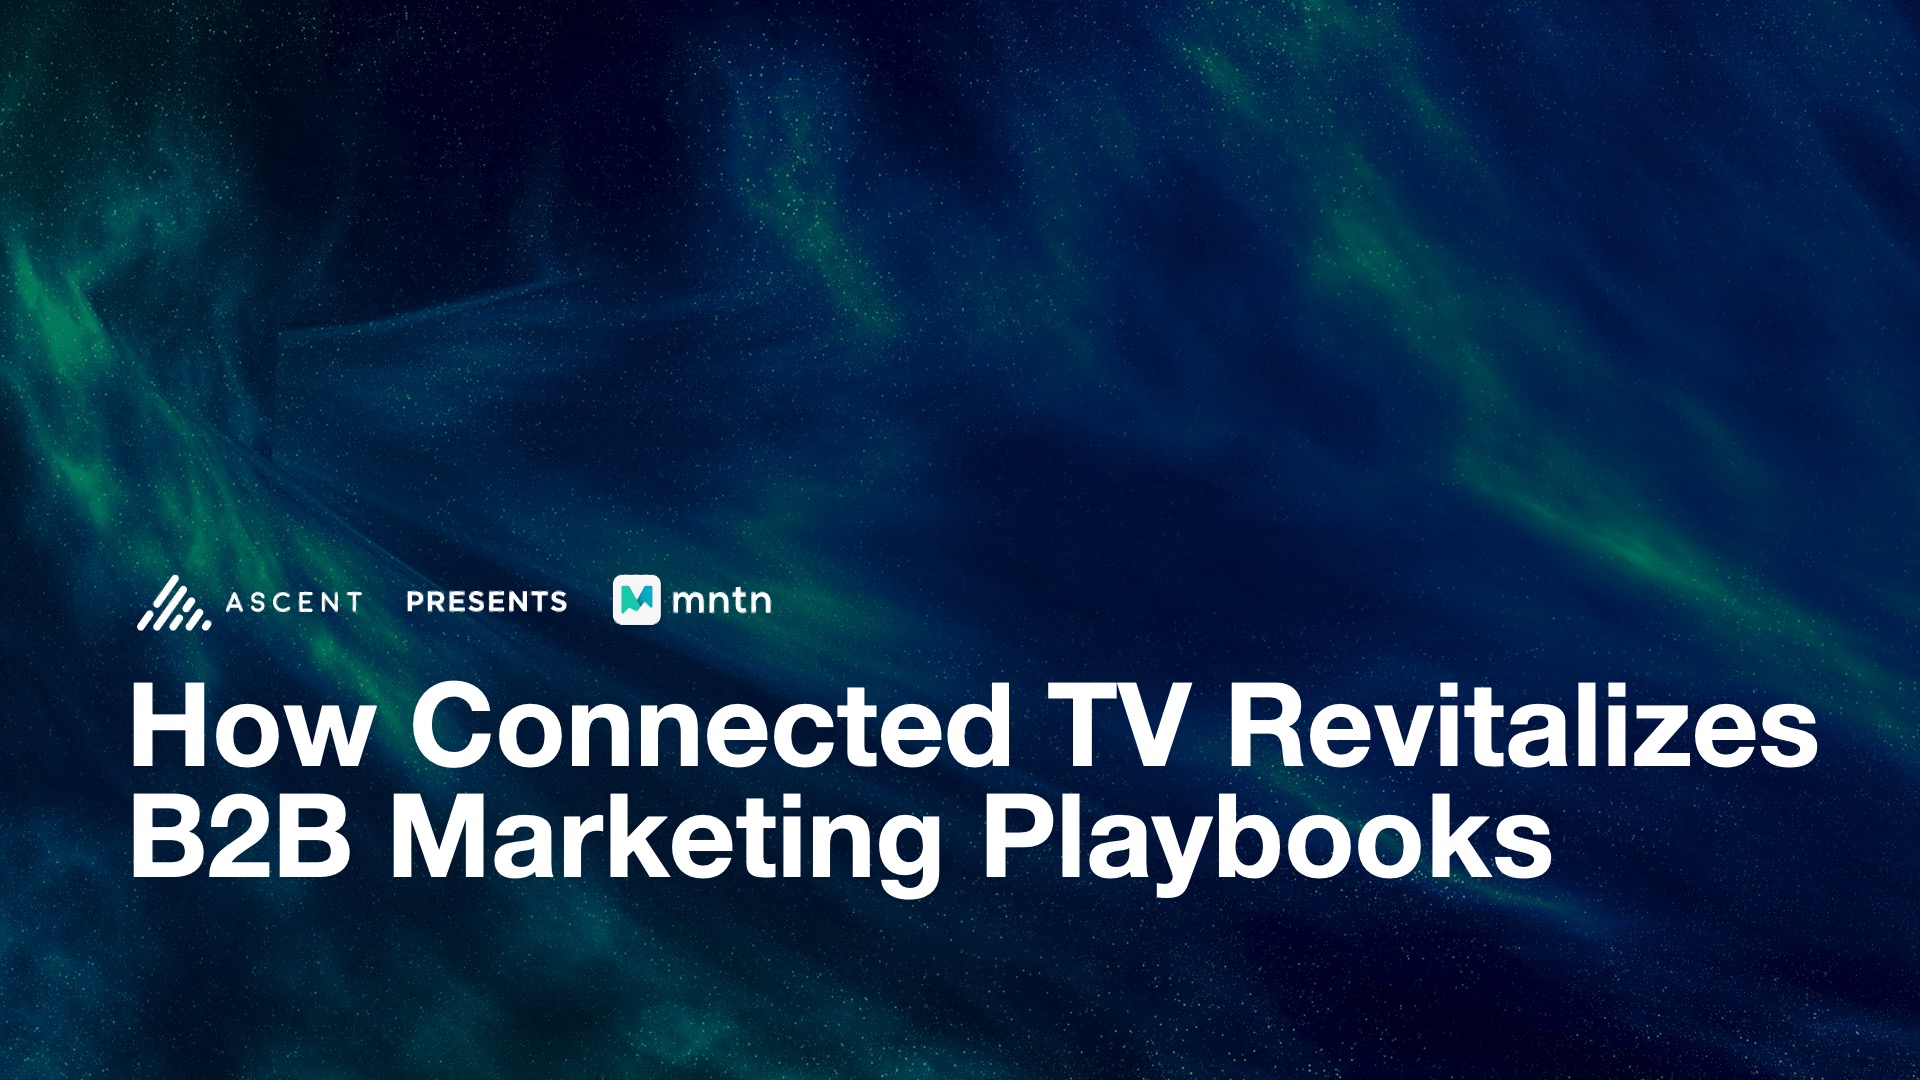 B2B, Meet CTV: How B2B Marketers Can Conquer TV Advertising